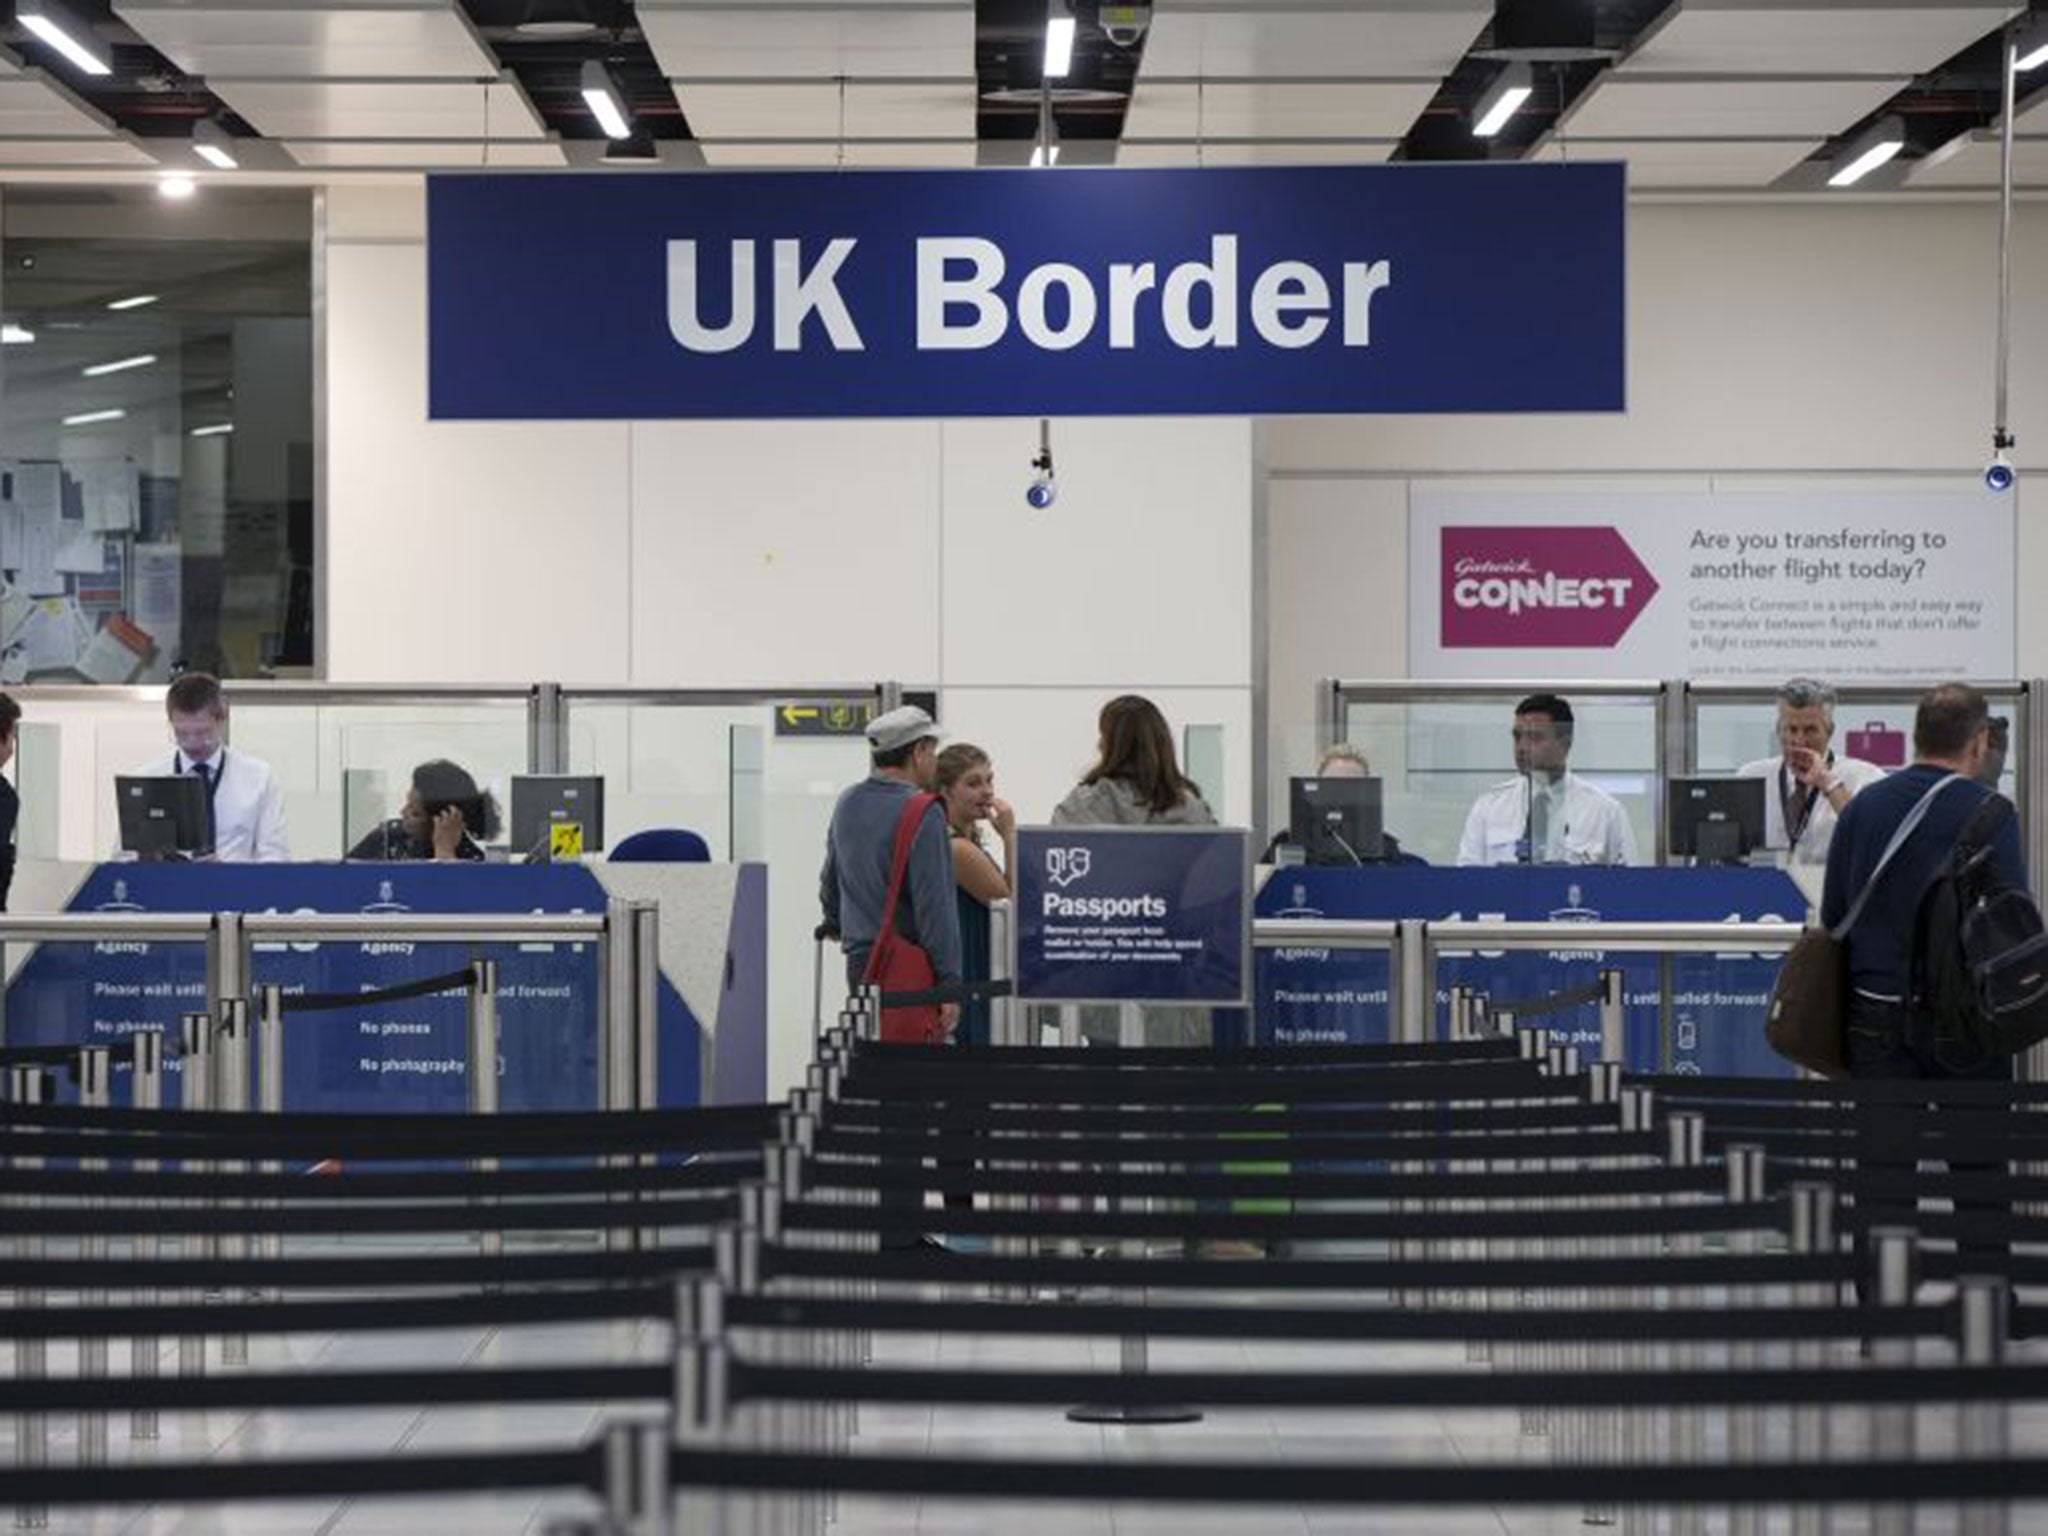 There will be additional checks to get into EU countries from the UK